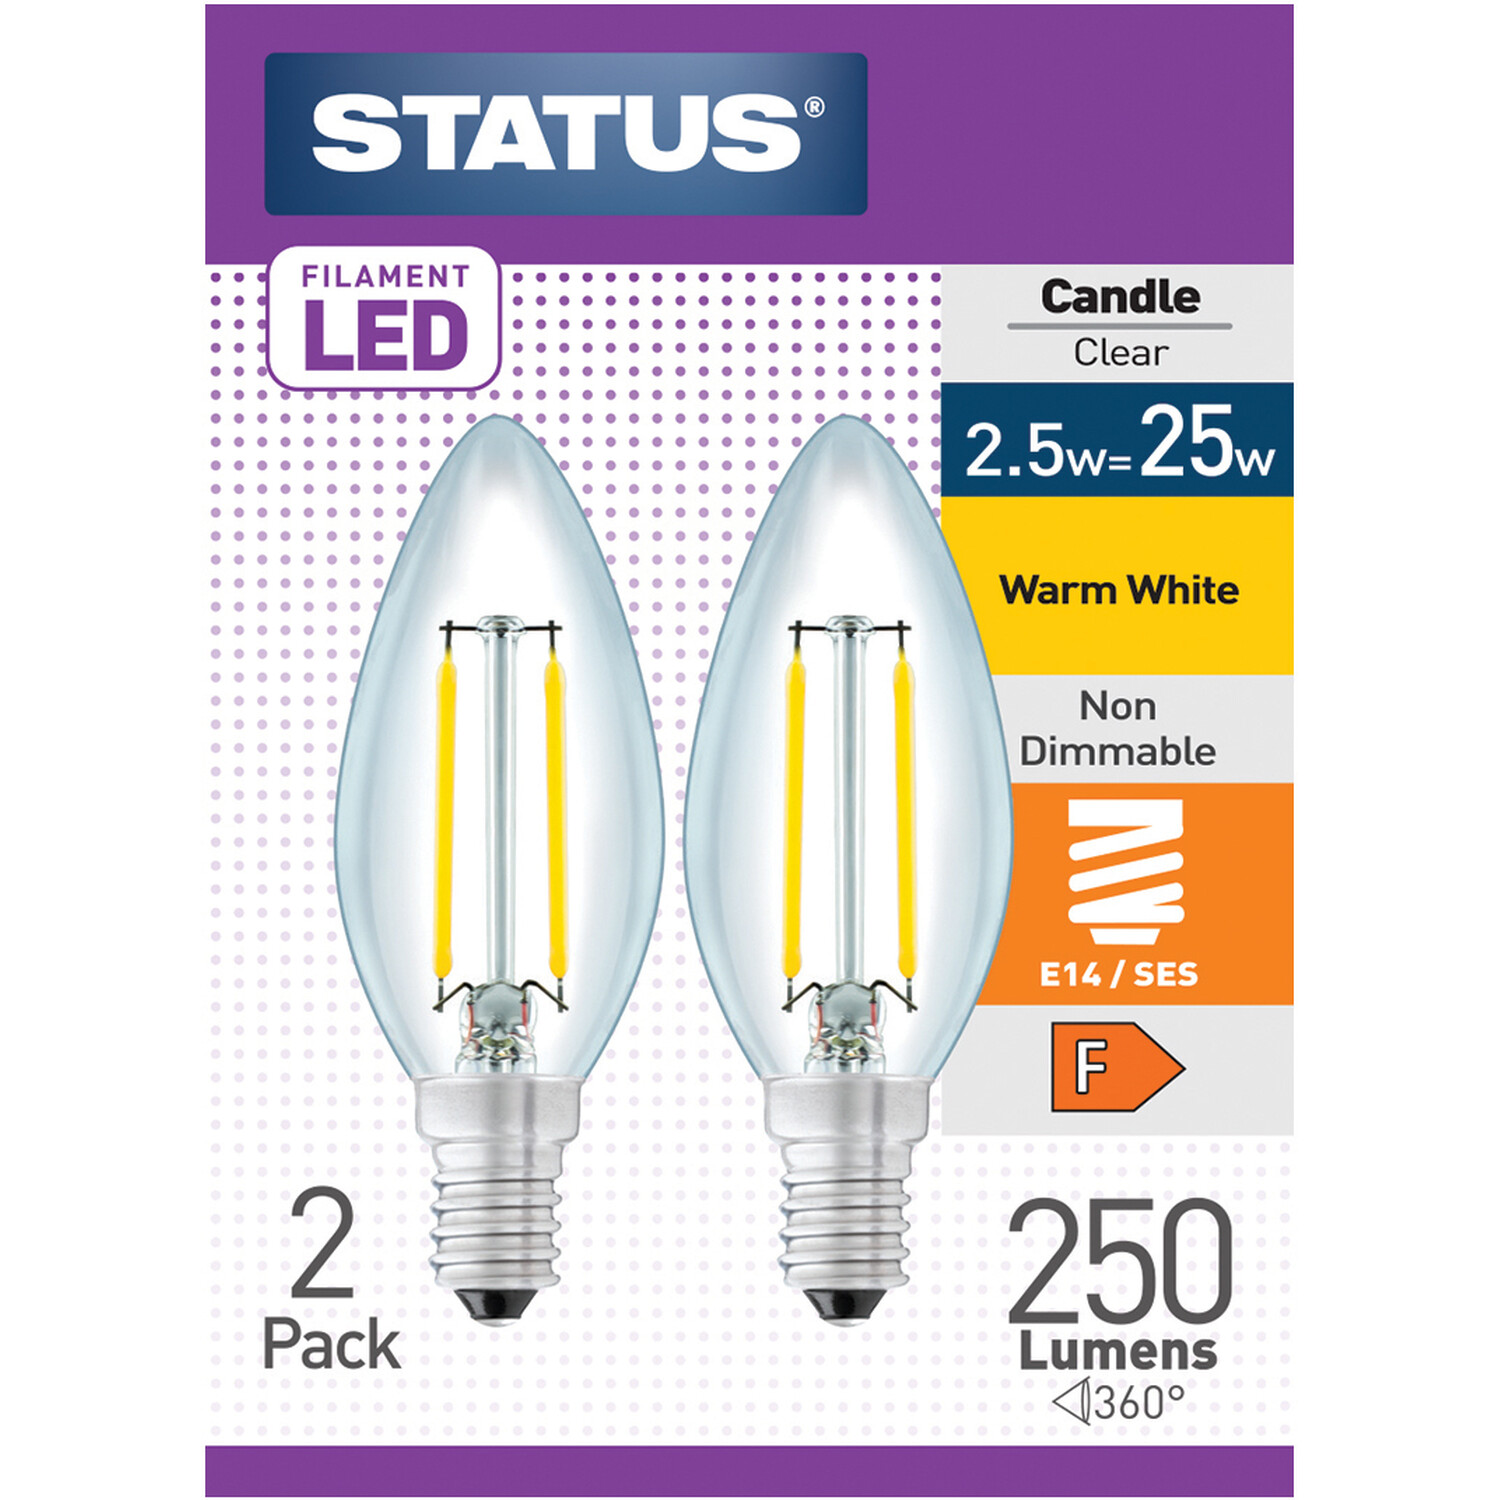 Pack of 2 Status Filament LED Clear Candle Bulbs - Small Edison Screw / SES Image 1